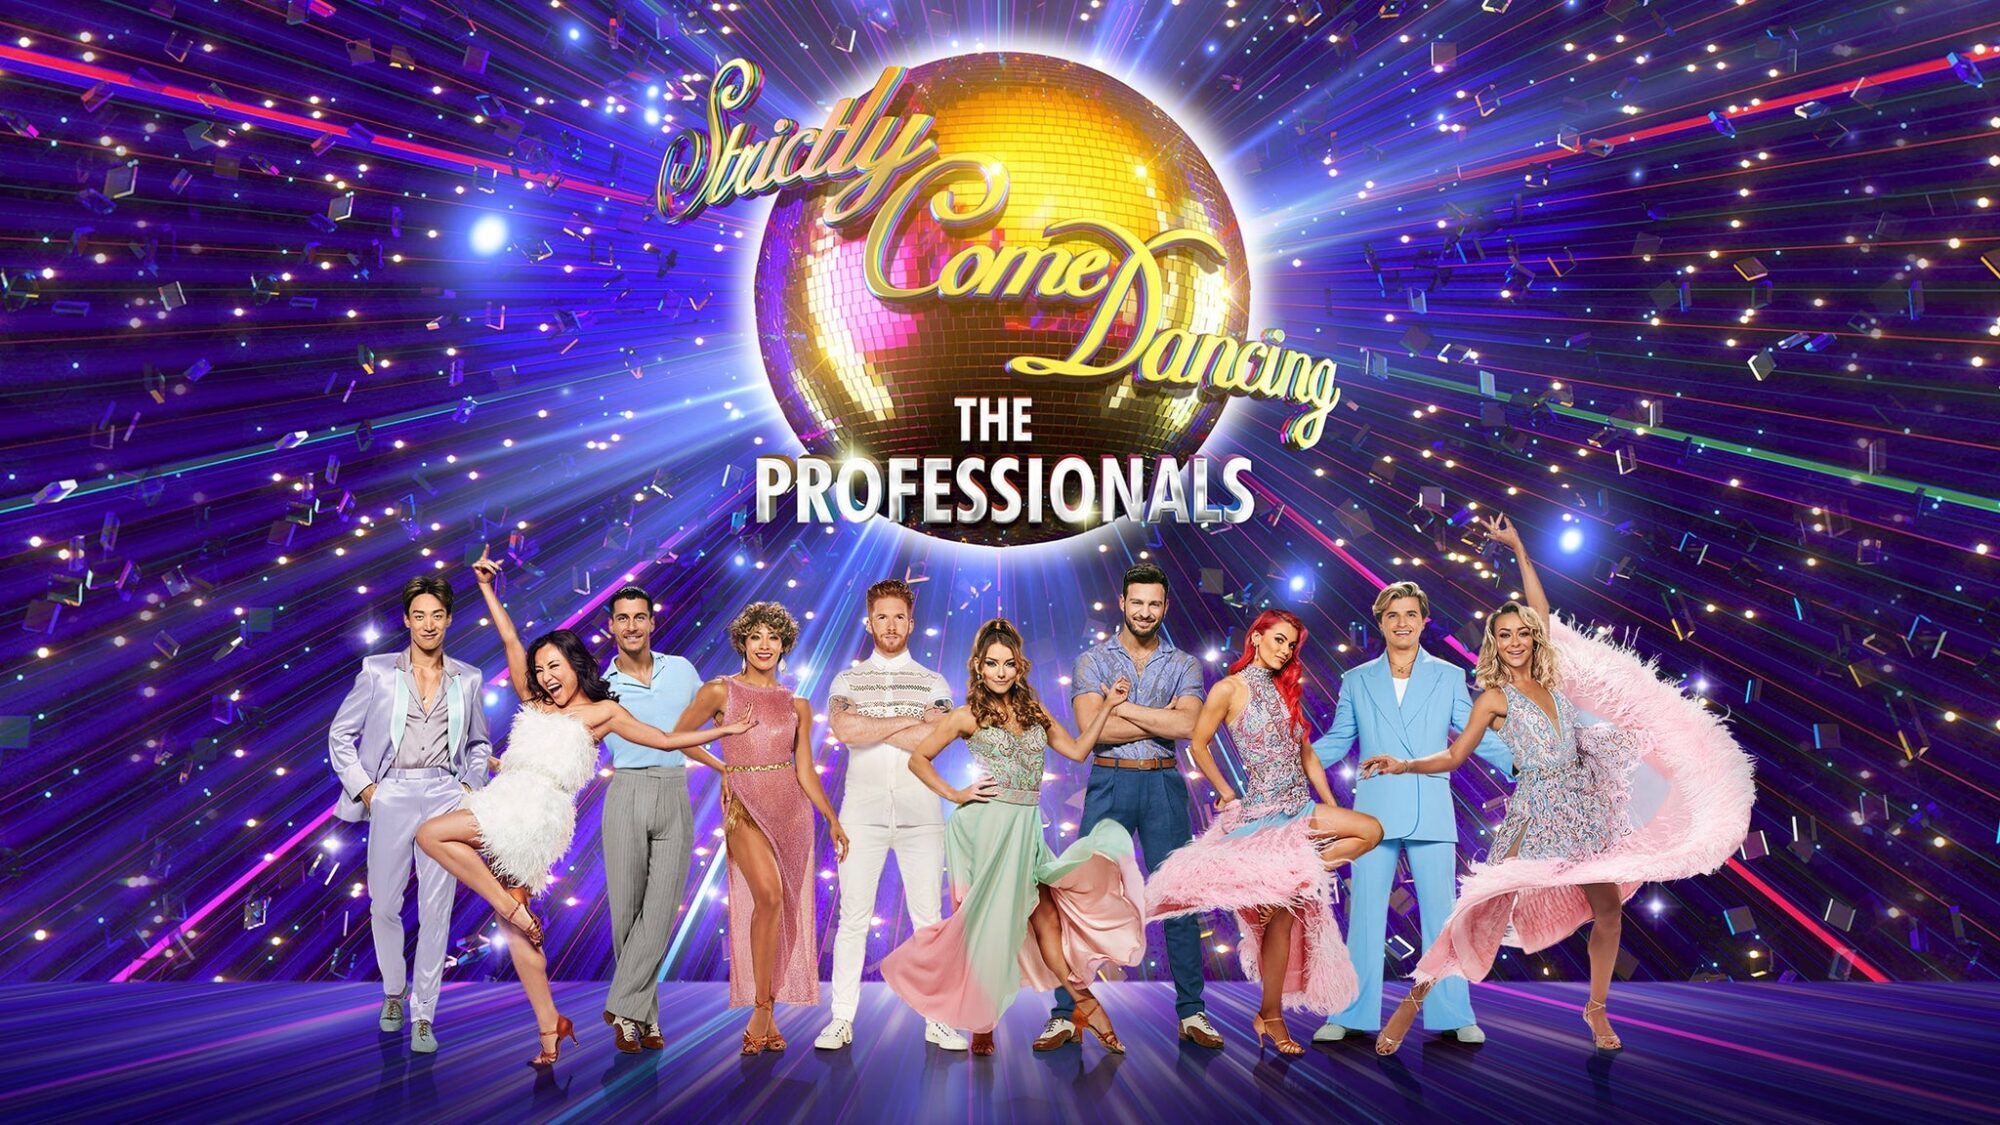 Image name Strictly Come Dancing the Professionals 2023 at Sheffield City Hall Oval Hall Sheffield the 24 image from the post Strictly Come Dancing the Professionals 2023 at Bonus Arena, Hull, Hull in Yorkshire.com.